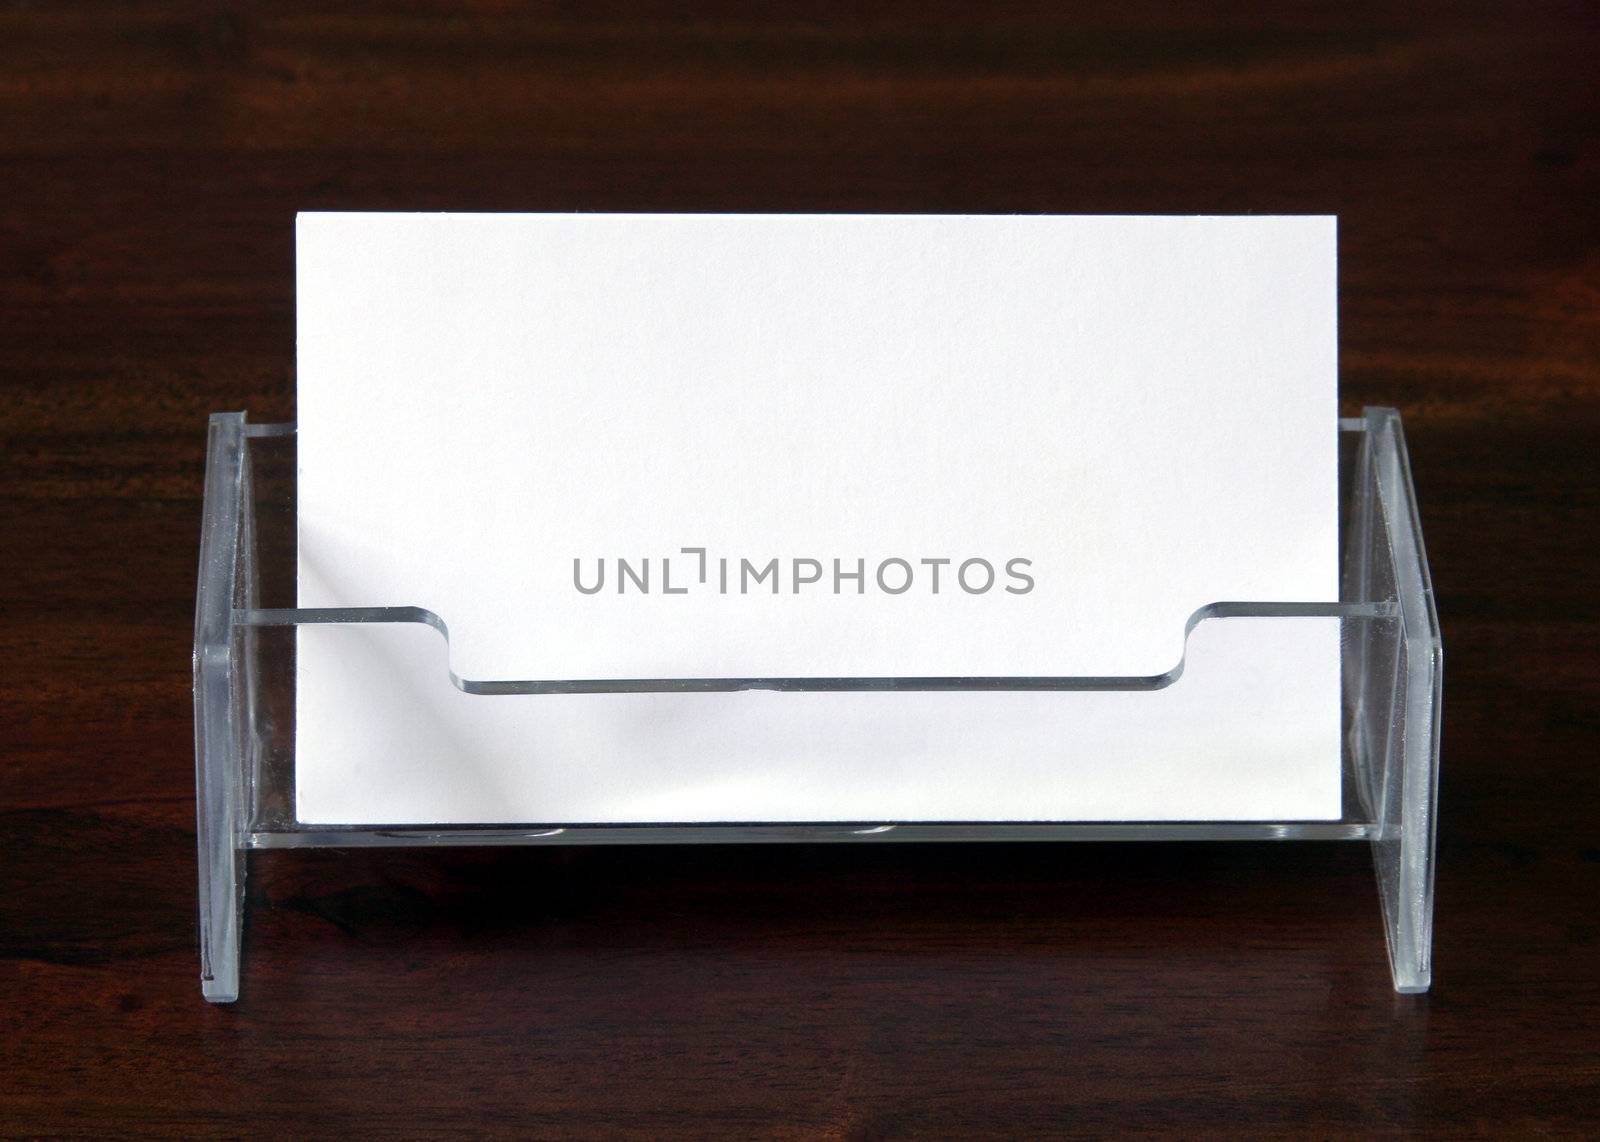 Blank Business Cards In Transparent Card Holder On Dark Wood Table